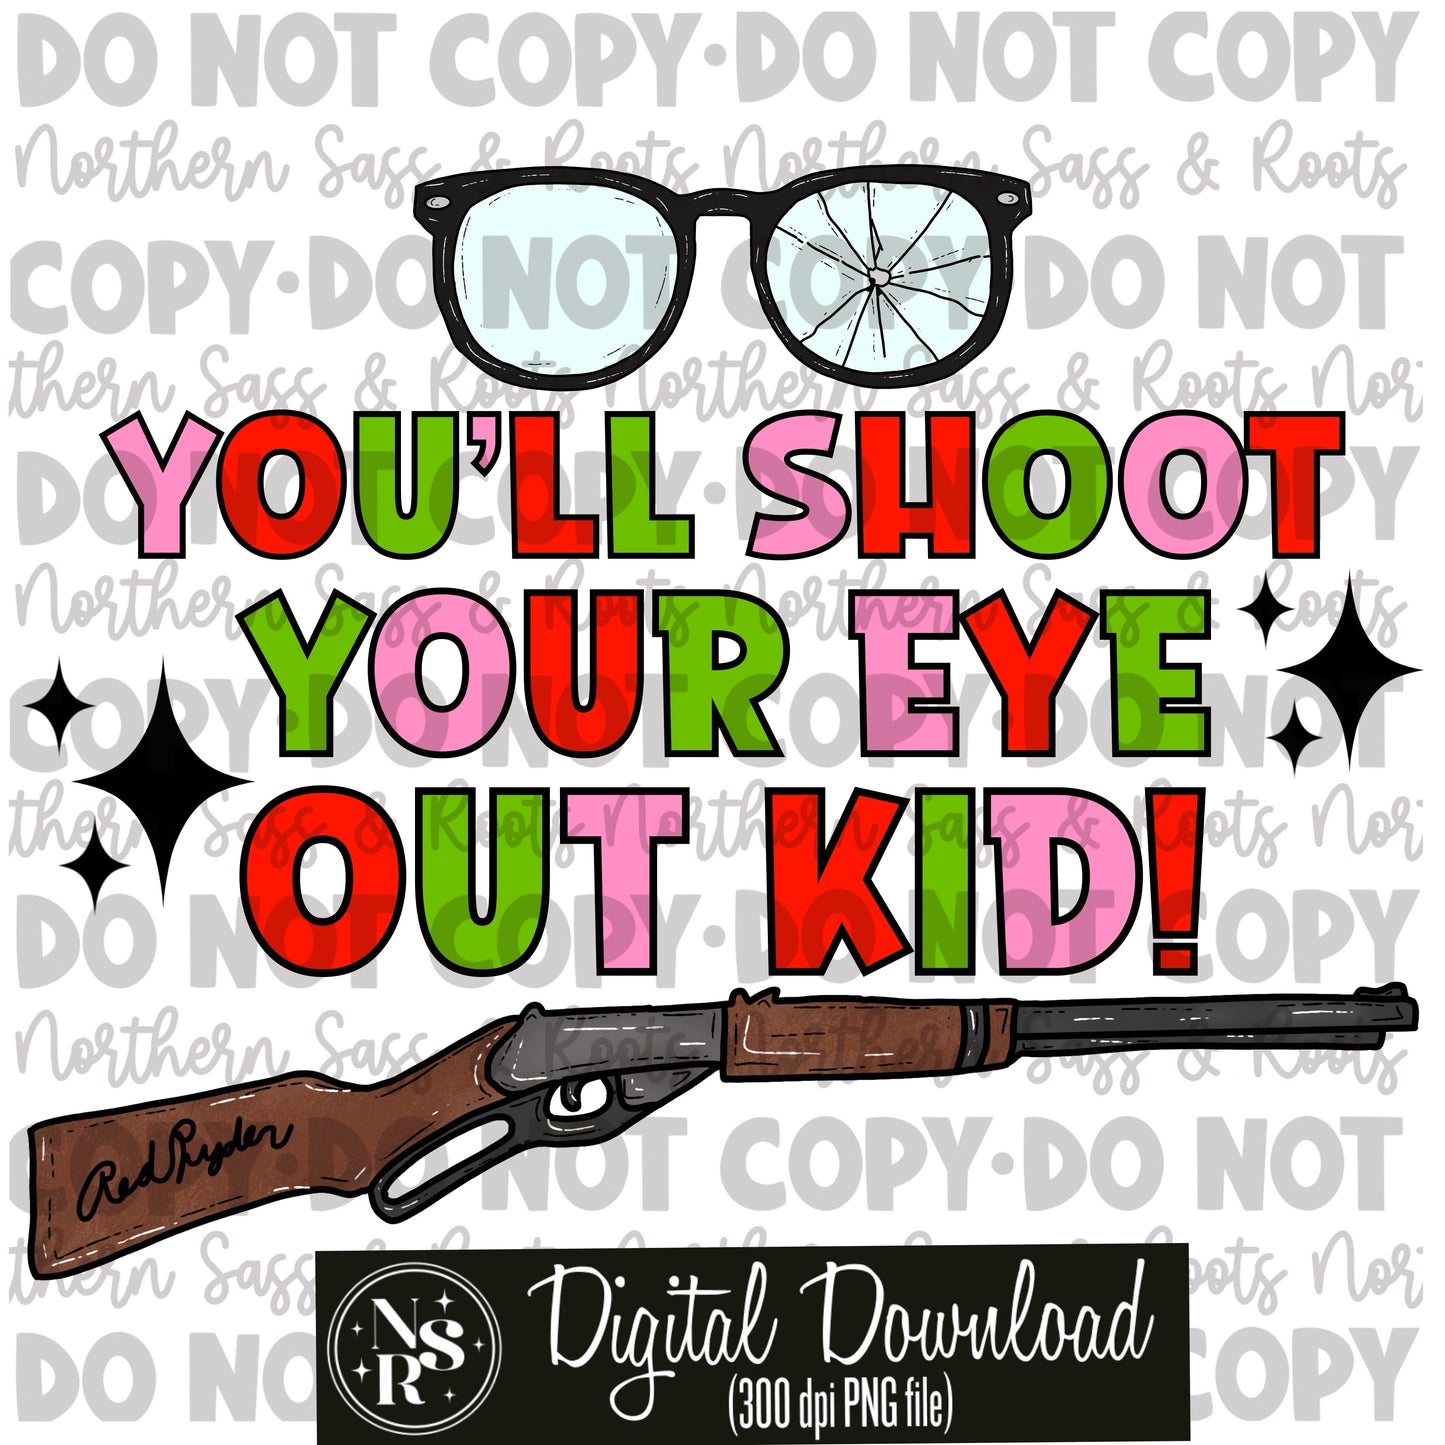 YOU’LL SHOOT YOUR EYE OUT KID!: Digital Download